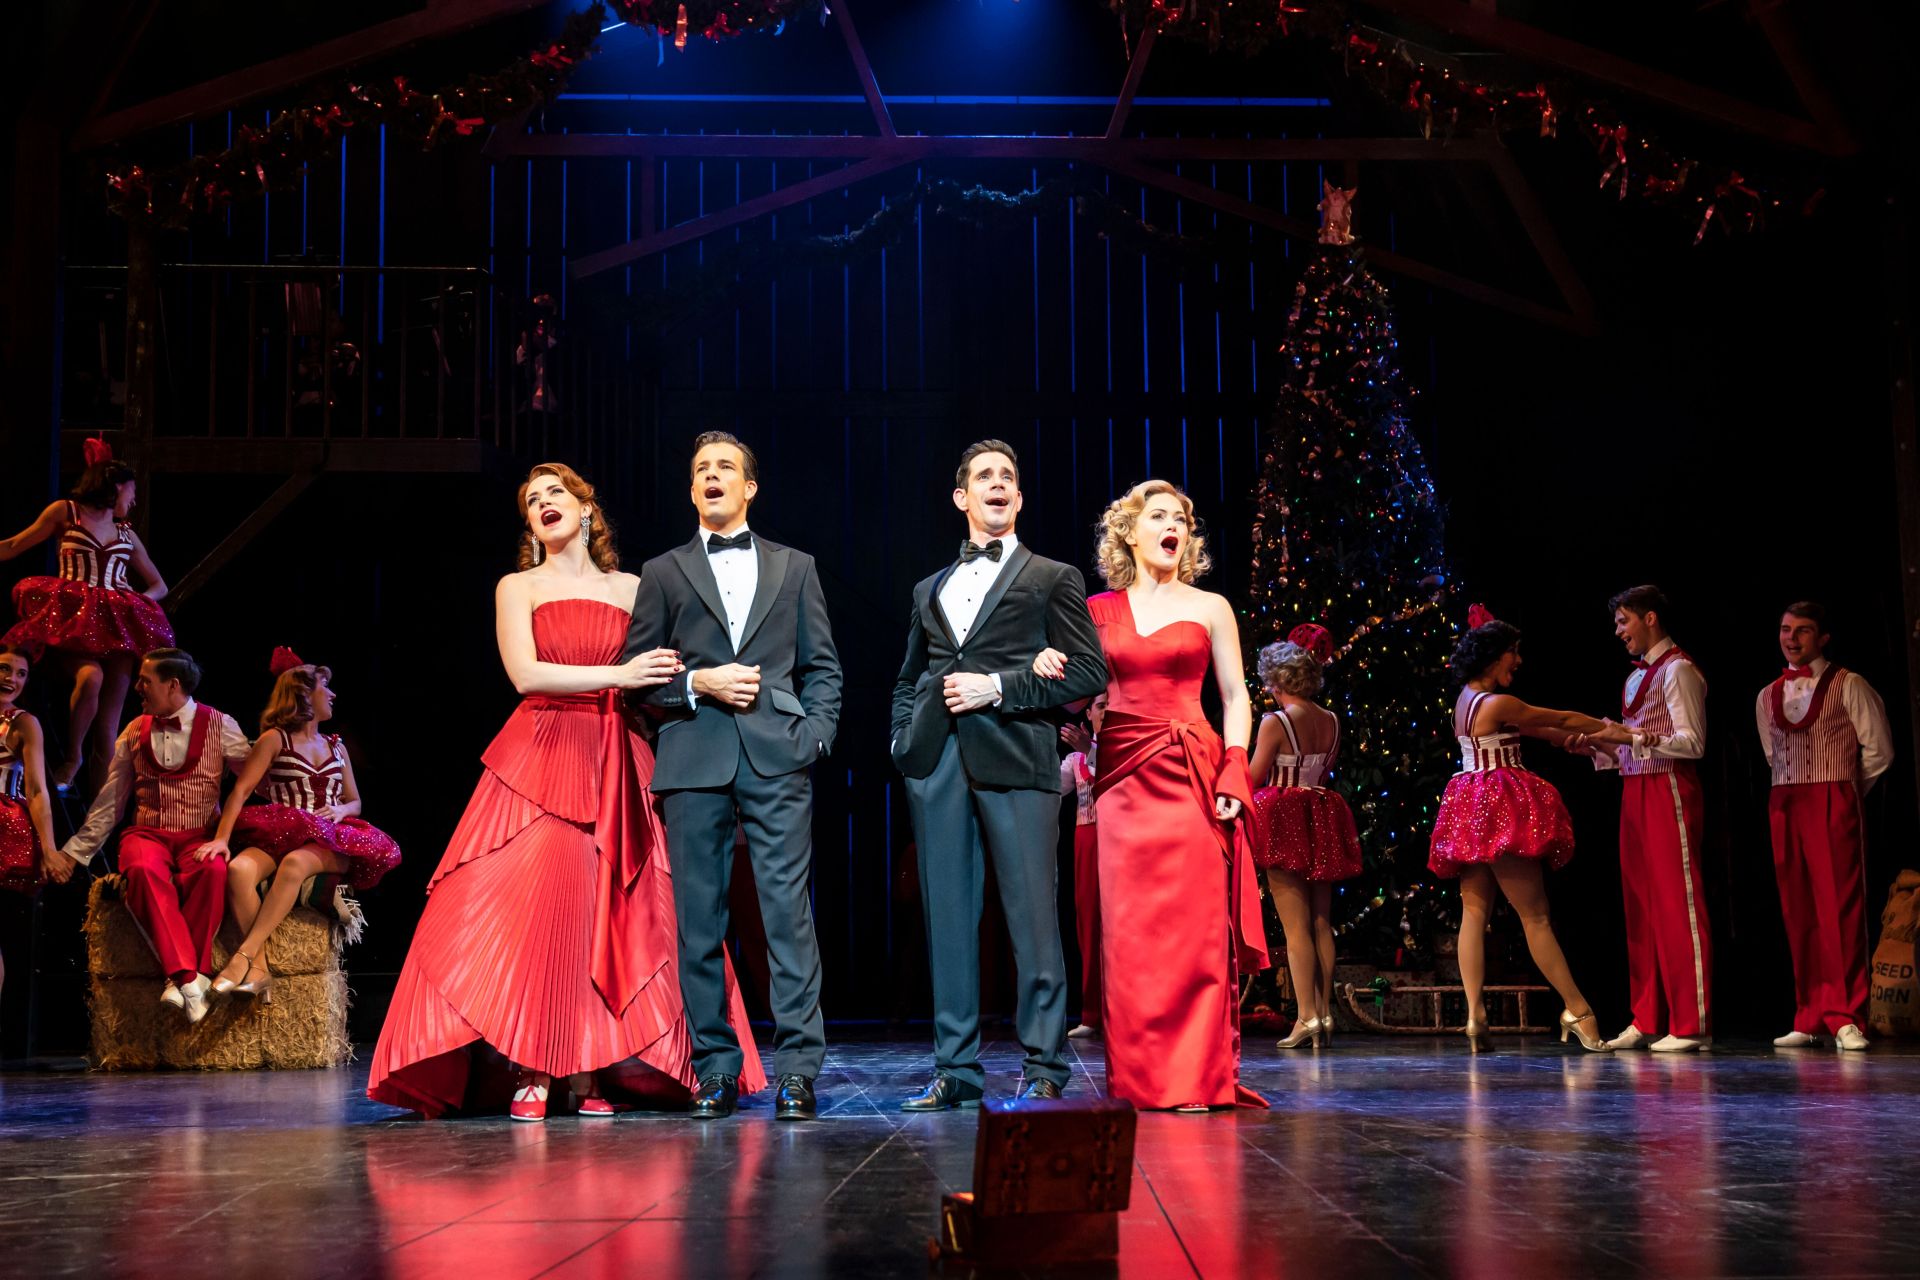 the four leads in 'White Christmas'